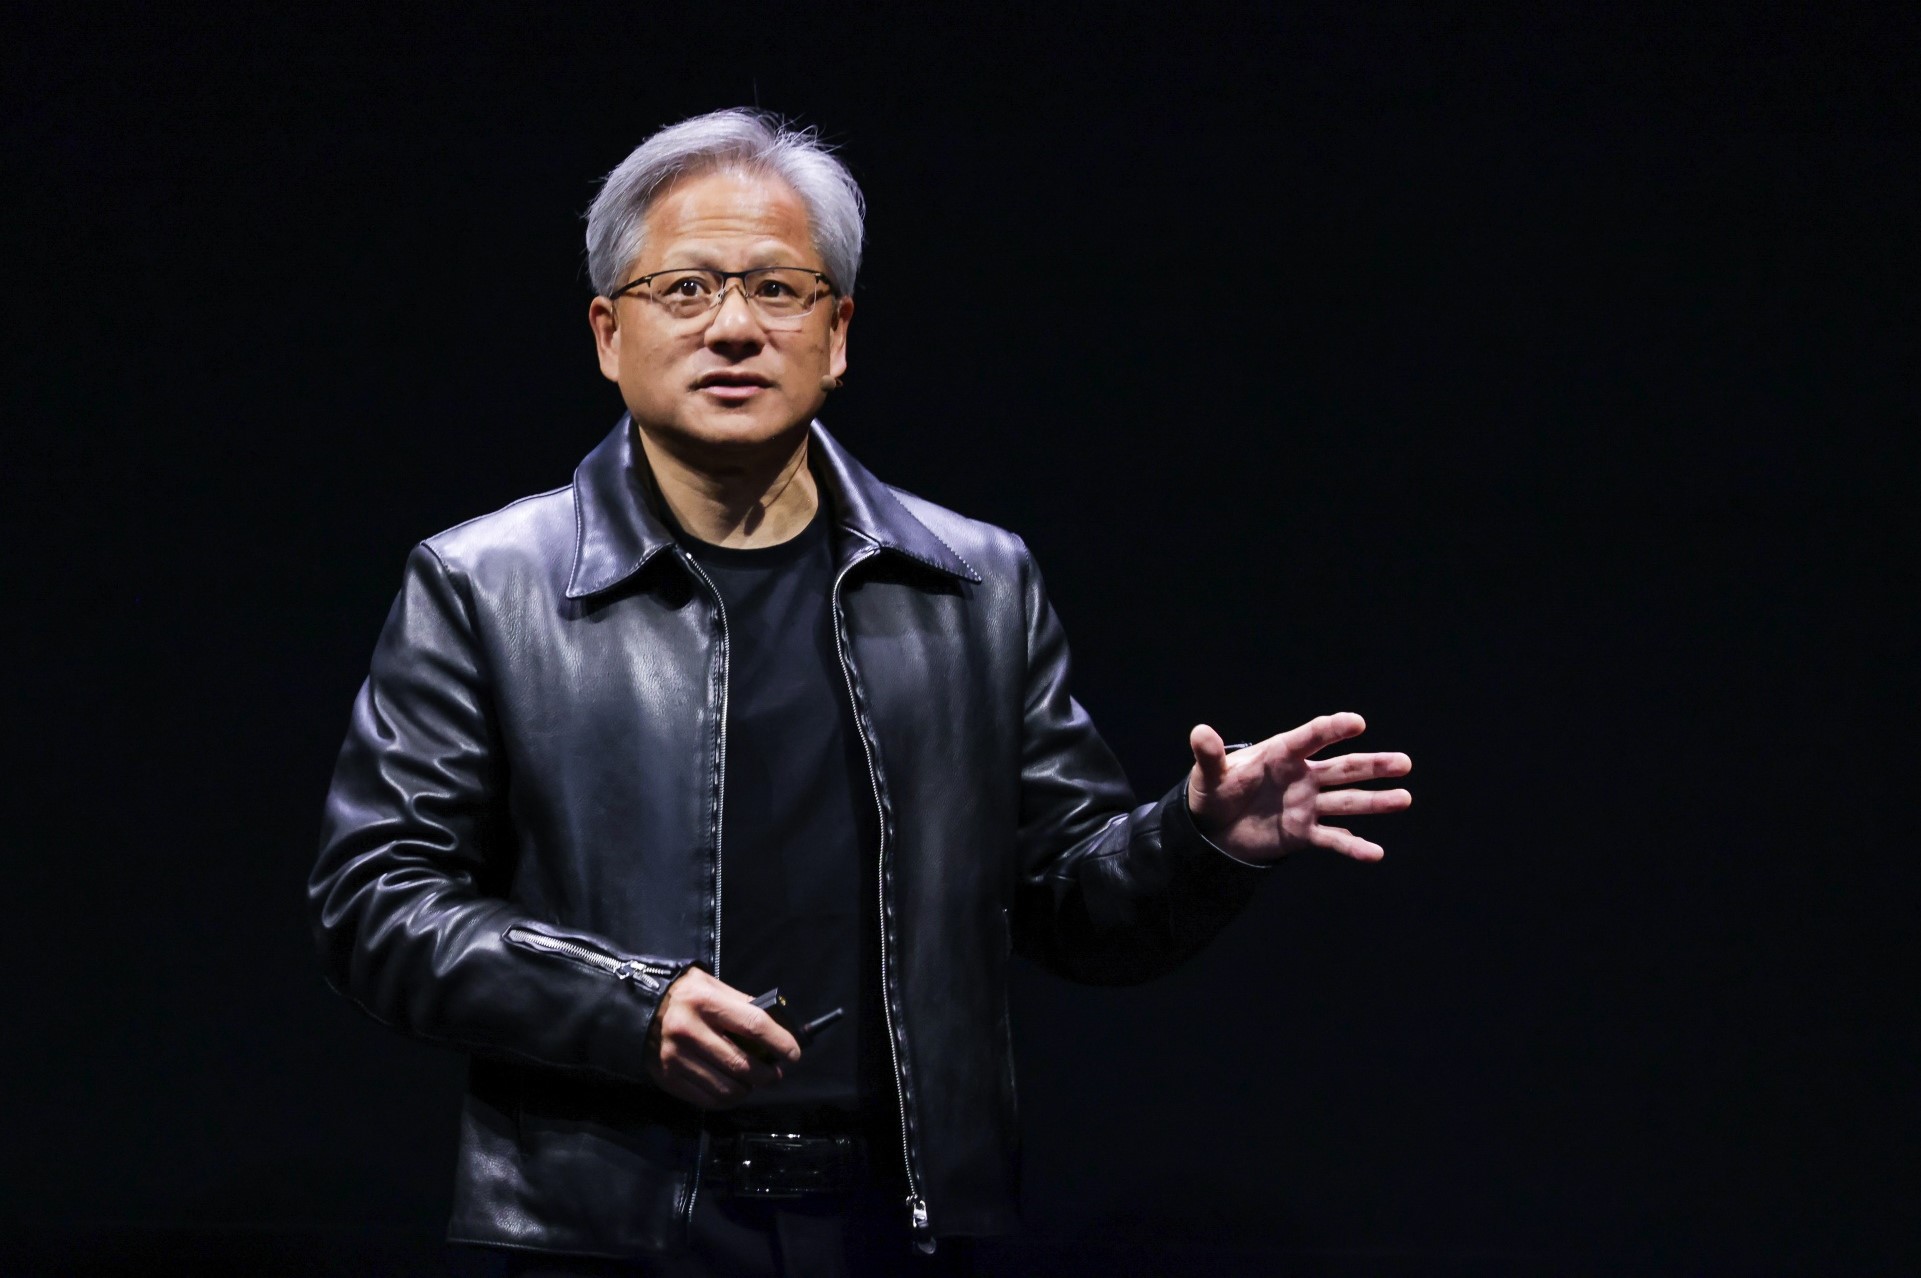 14-intriguing-facts-about-jensen-huang